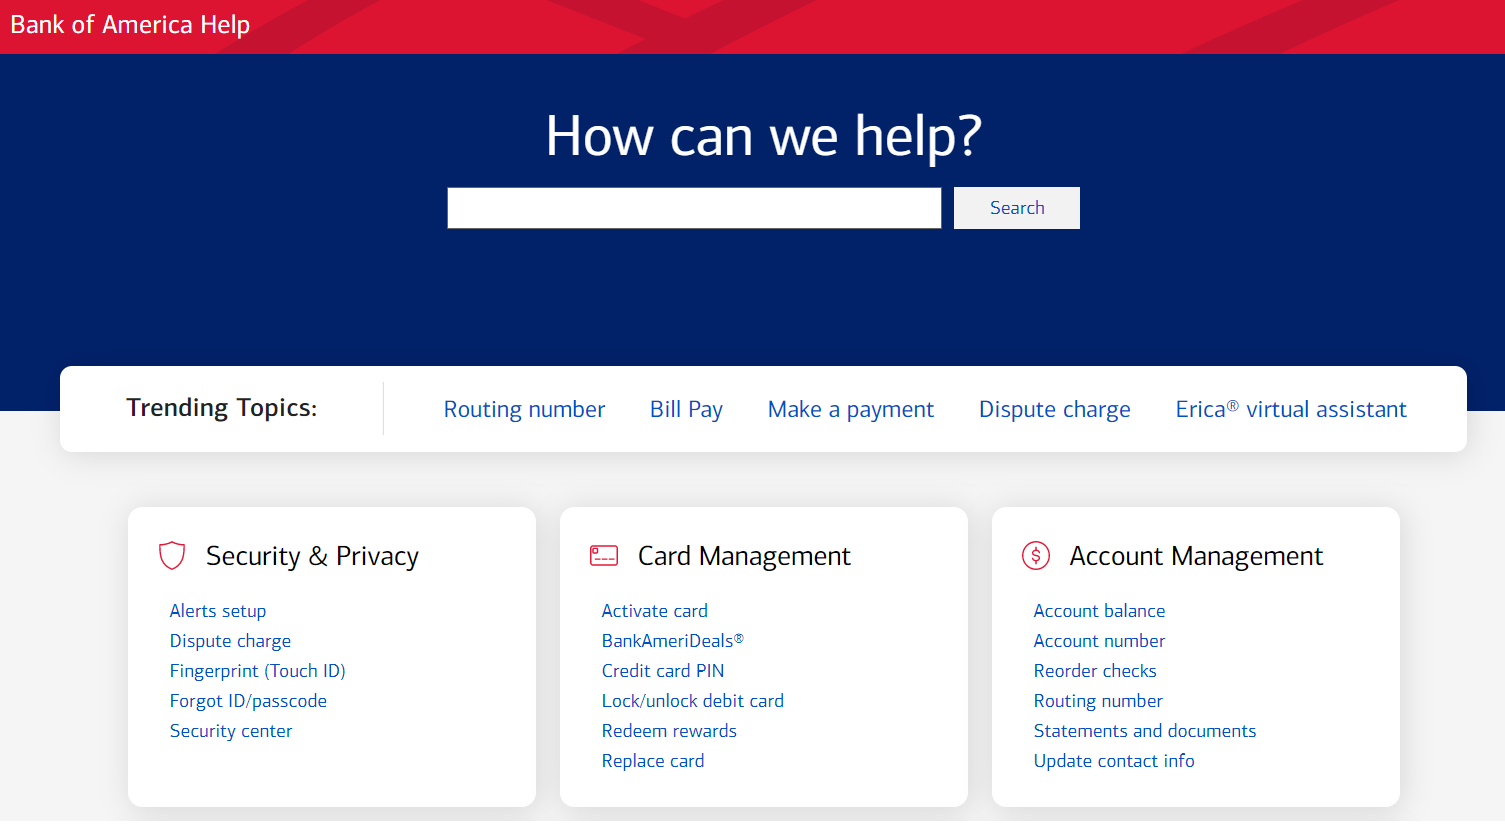 Bank of America - FAQ Page Example